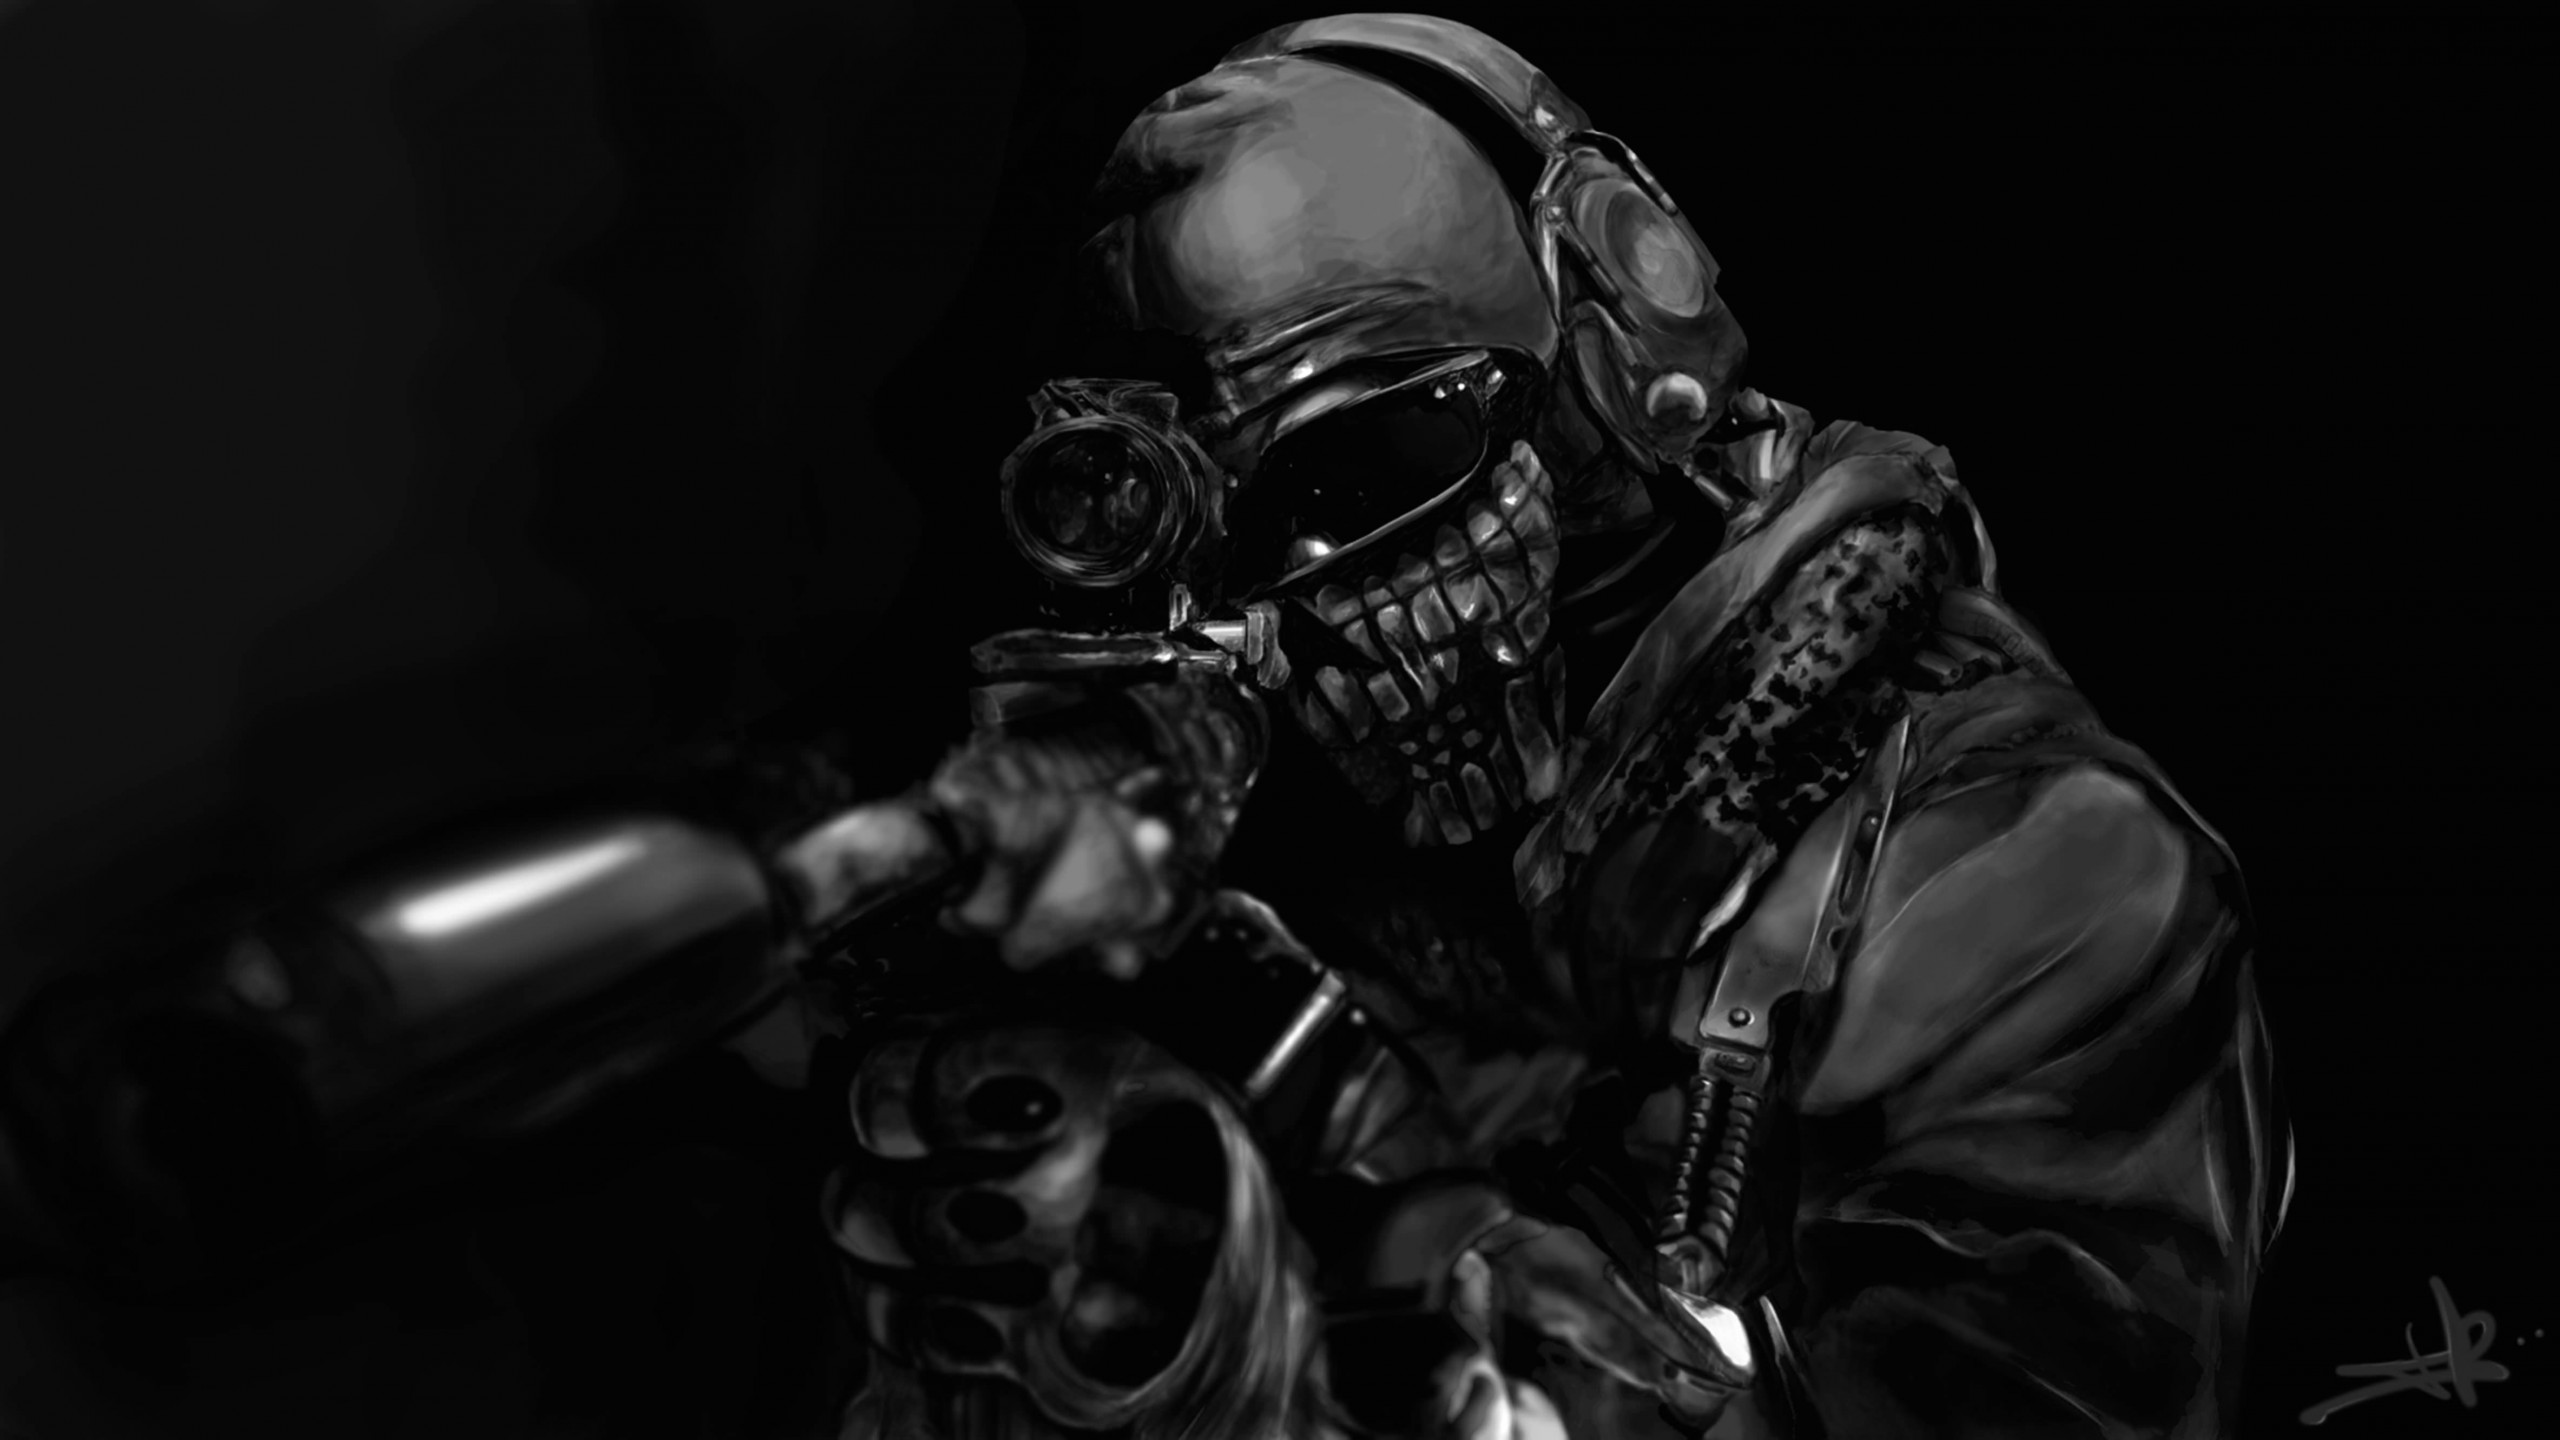 Call of Duty Ghost Masked Warrior Wallpaper for Desktop 2560x1440